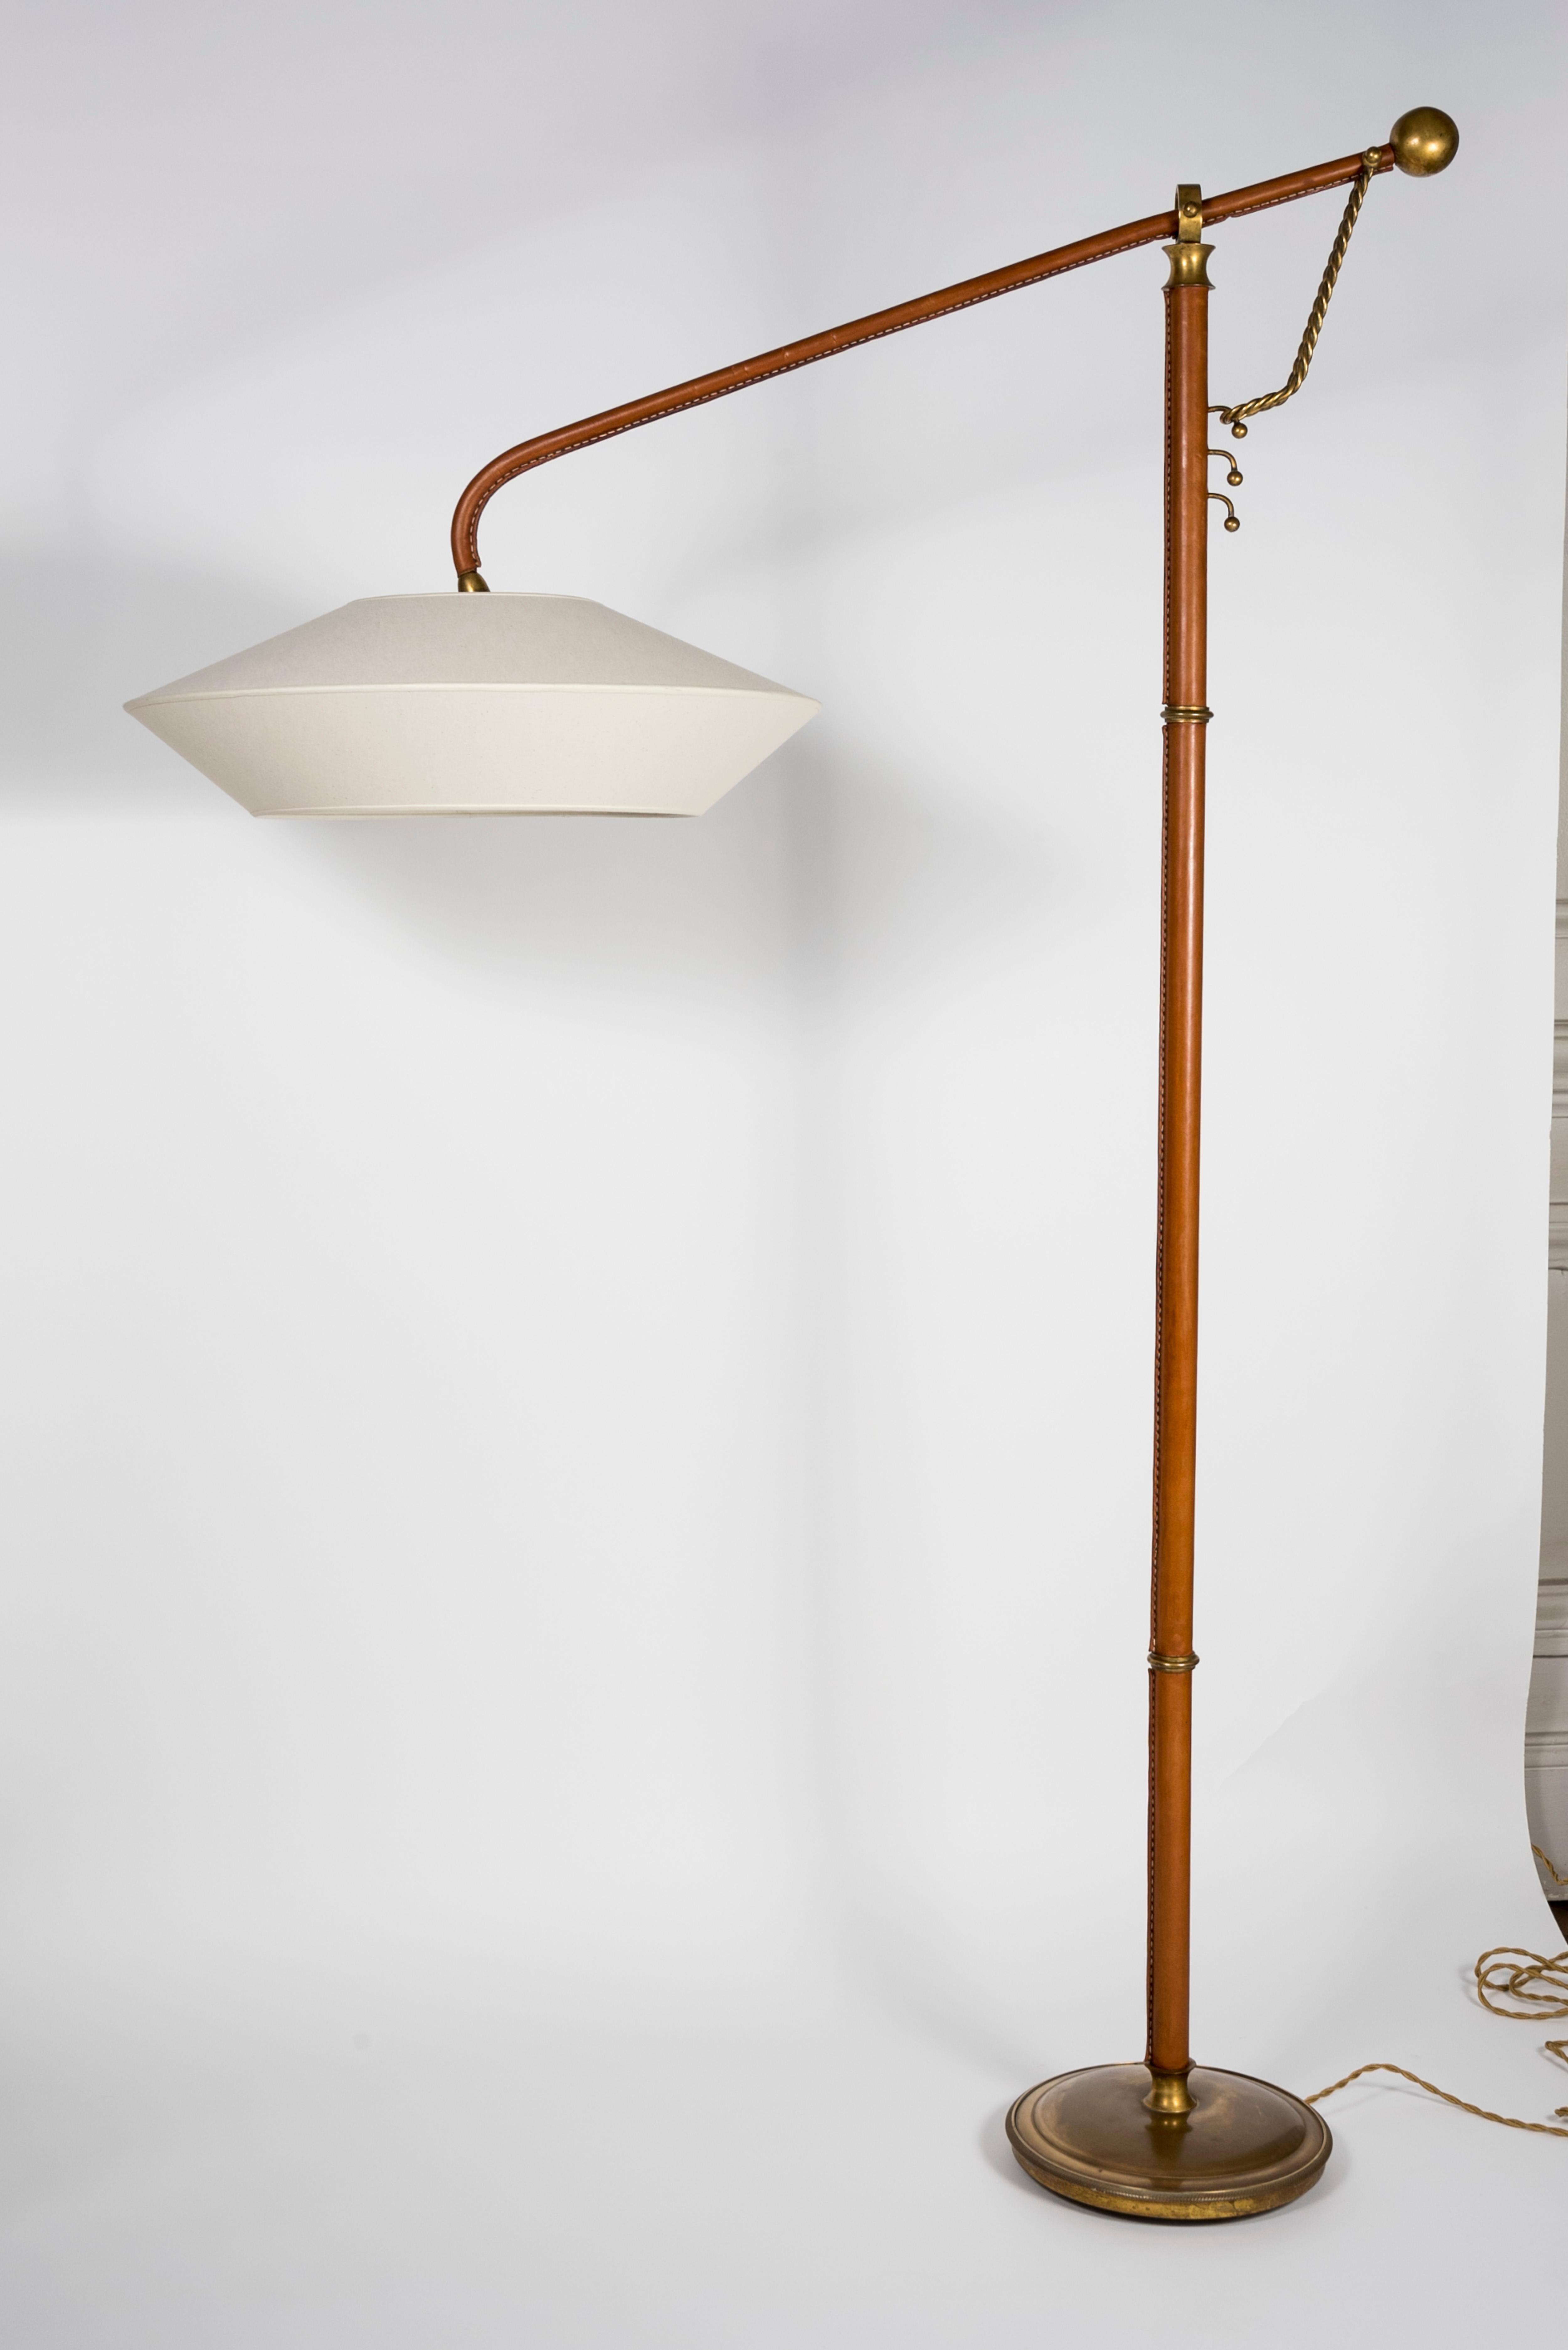 Mid-20th Century Stitched Leather Floor Lamp by Jacques Adnet